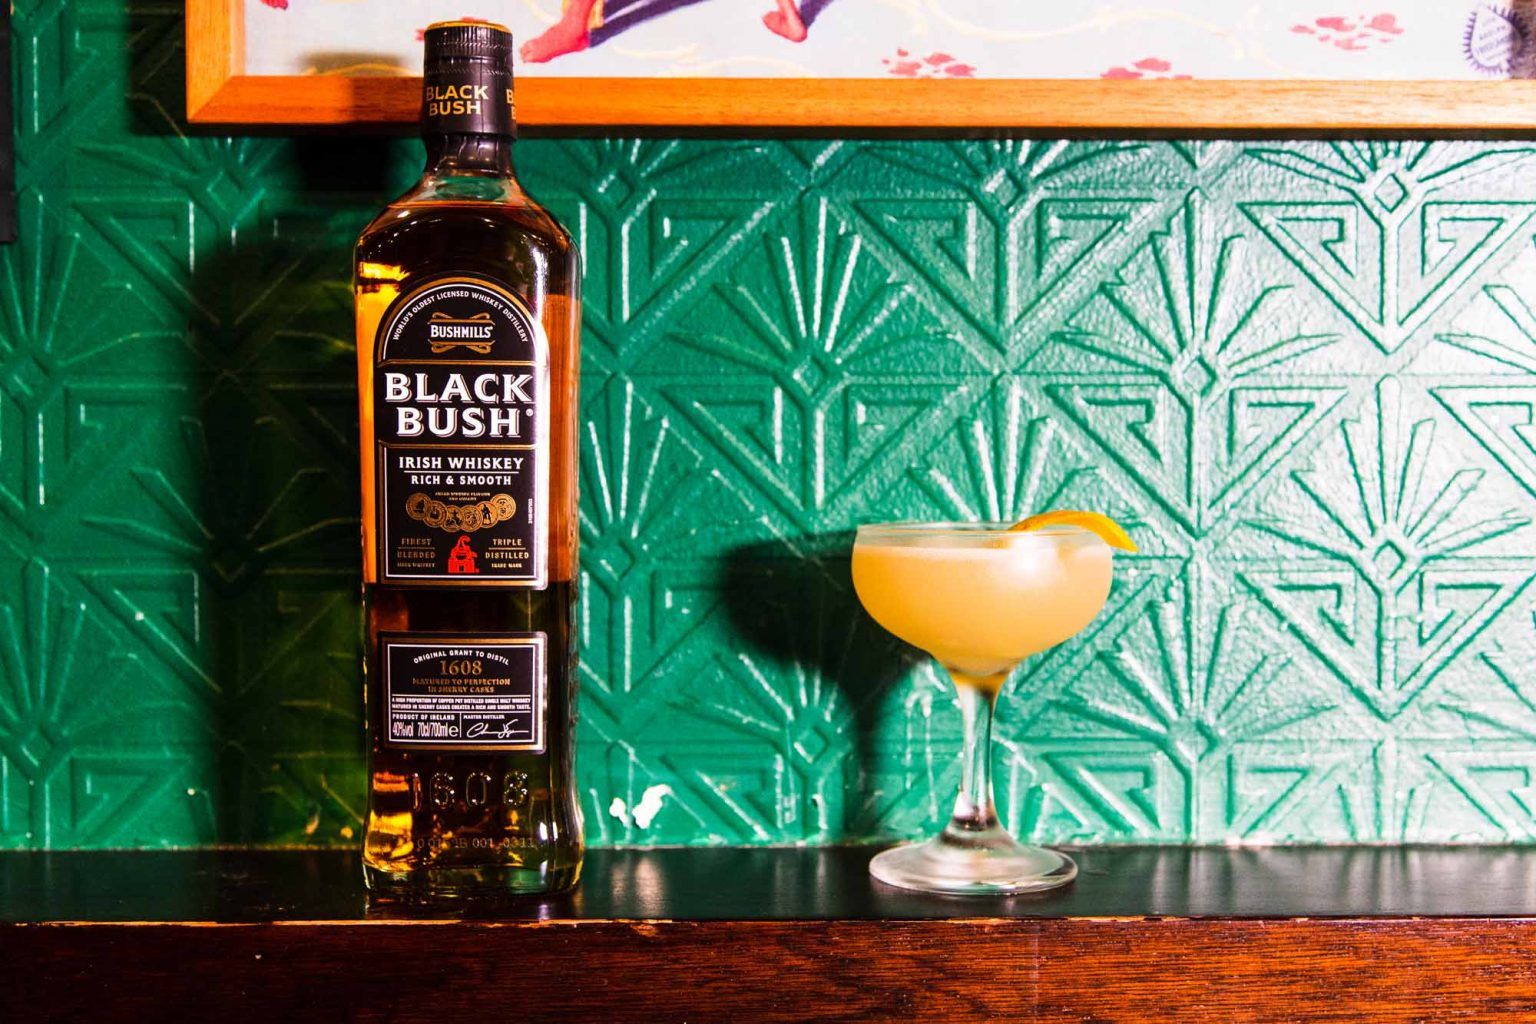 Cameron’s Kick: the cocktail that blends Irish whiskey with its Scottish cousin